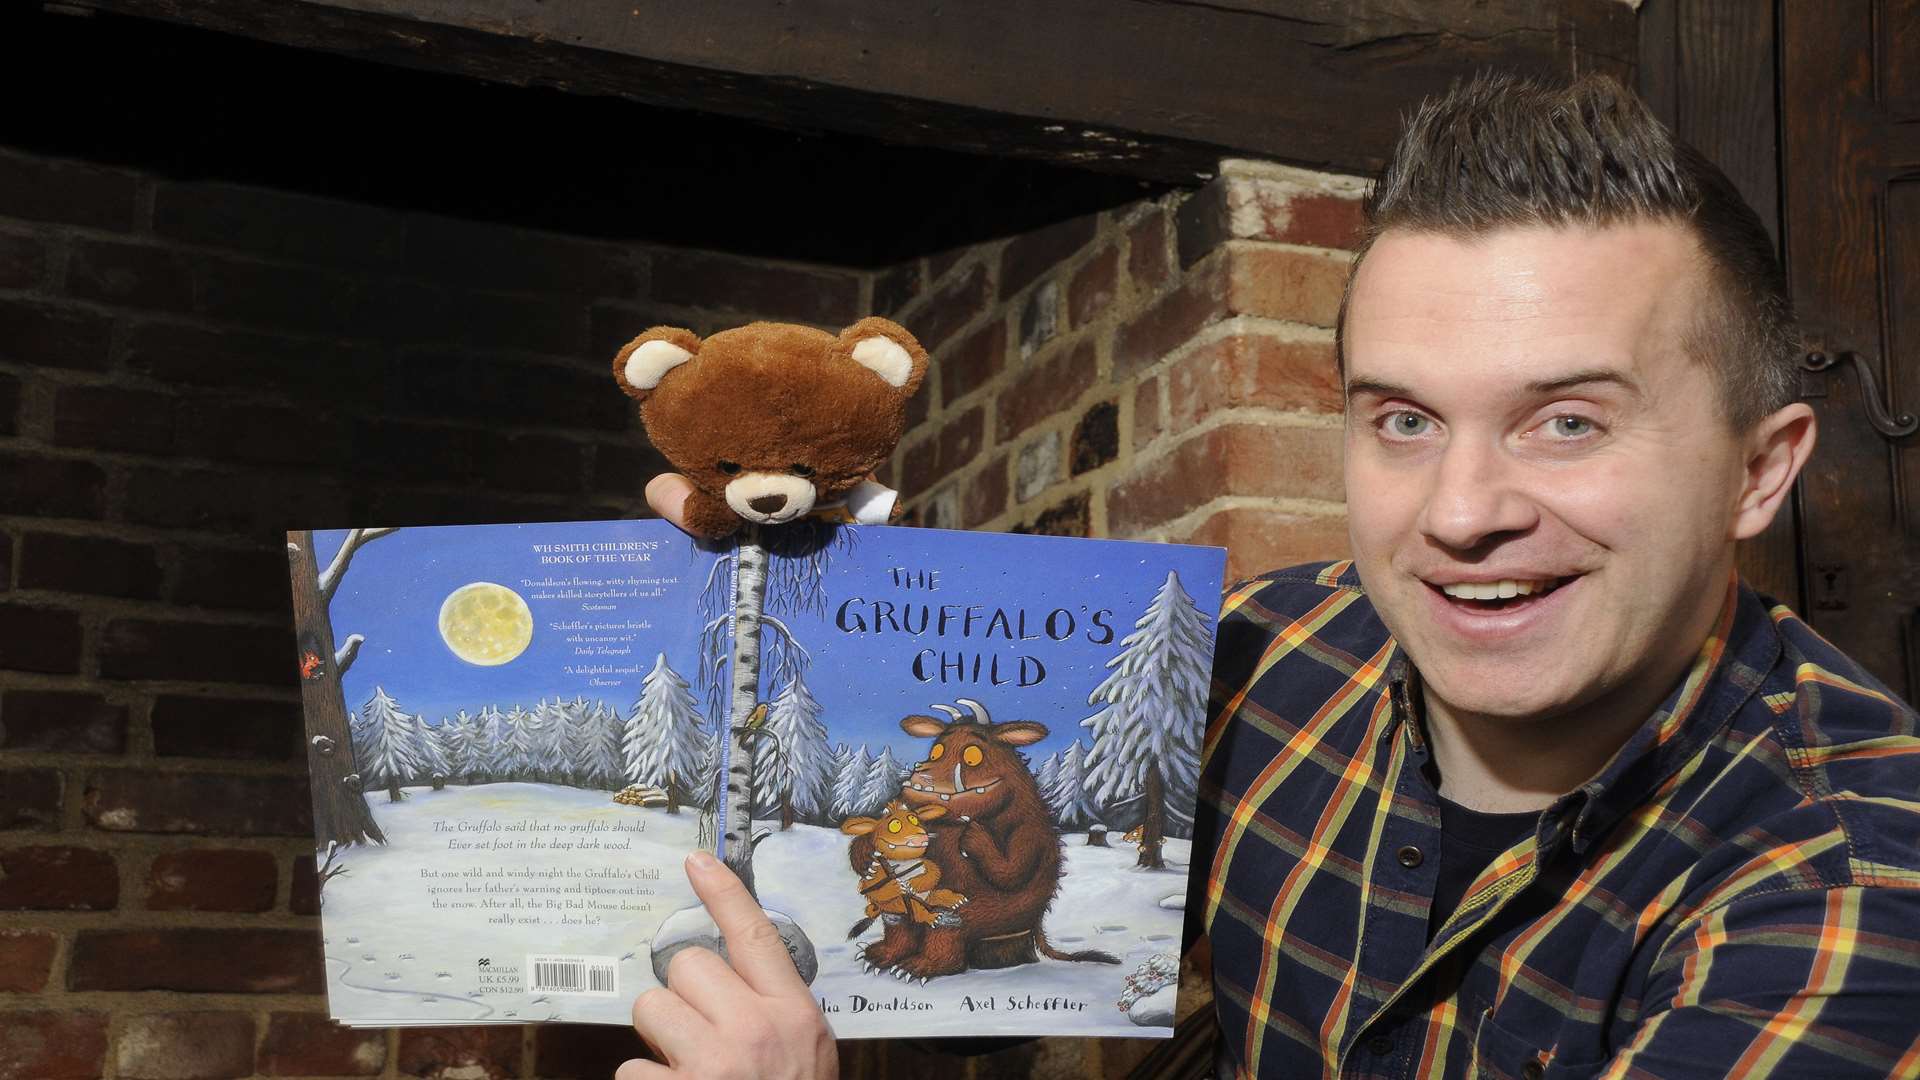 Phil Gallagher Mister Maker from the CBeebies television children show is ready to visit winning school